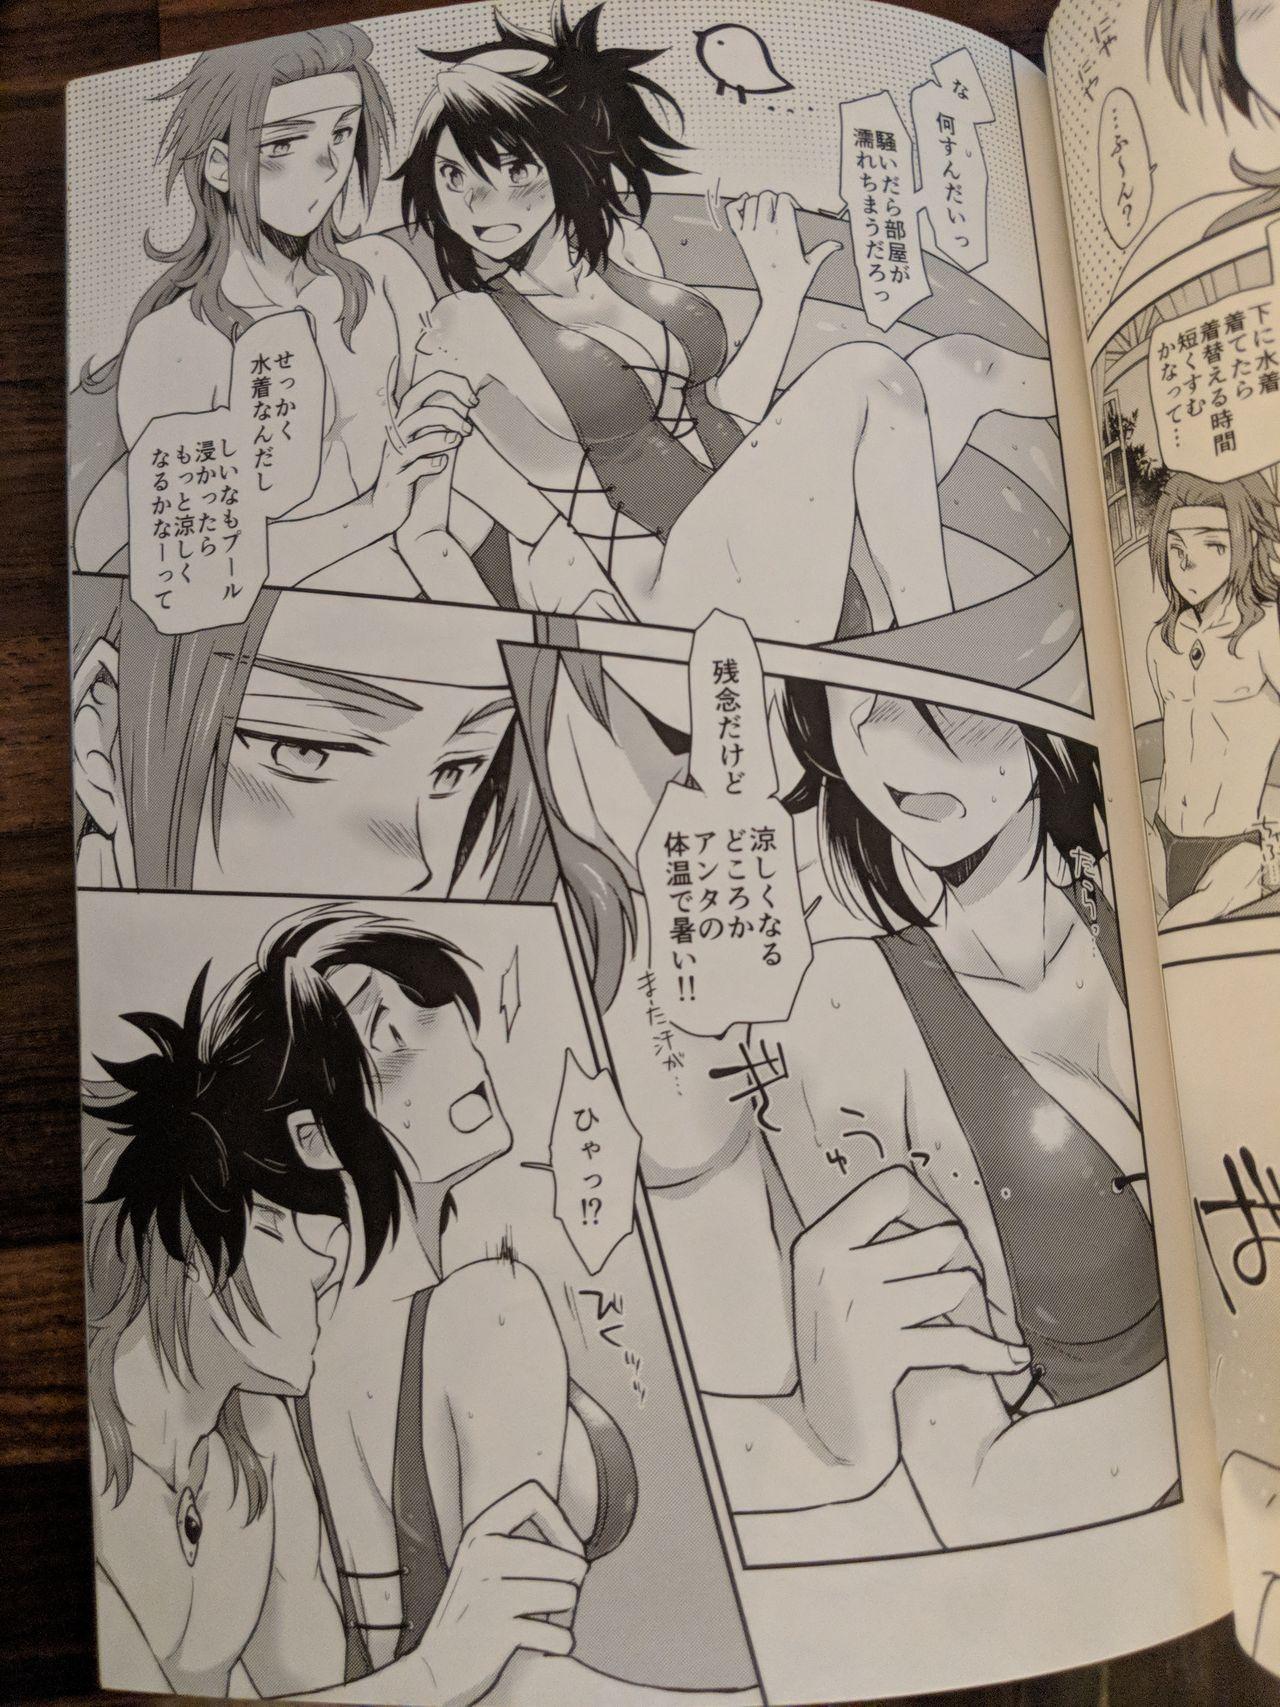 Load 彼女が水着にきがえたら - Tales of symphonia Behind - Page 8